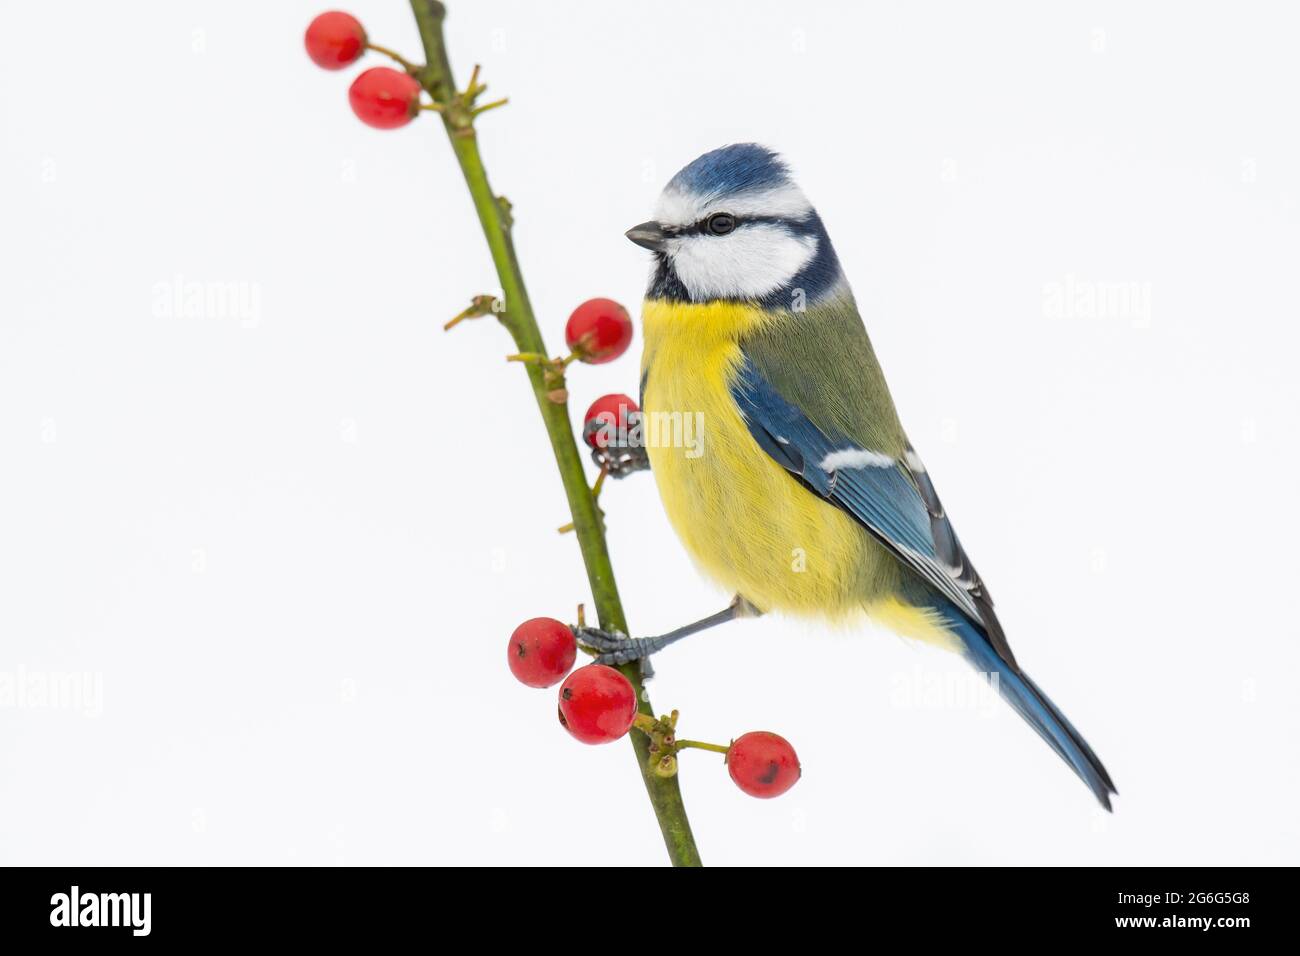 blue tit (Parus caeruleus, Cyanistes caeruleus), on a twig with red berries, cut-out, Germany Stock Photo